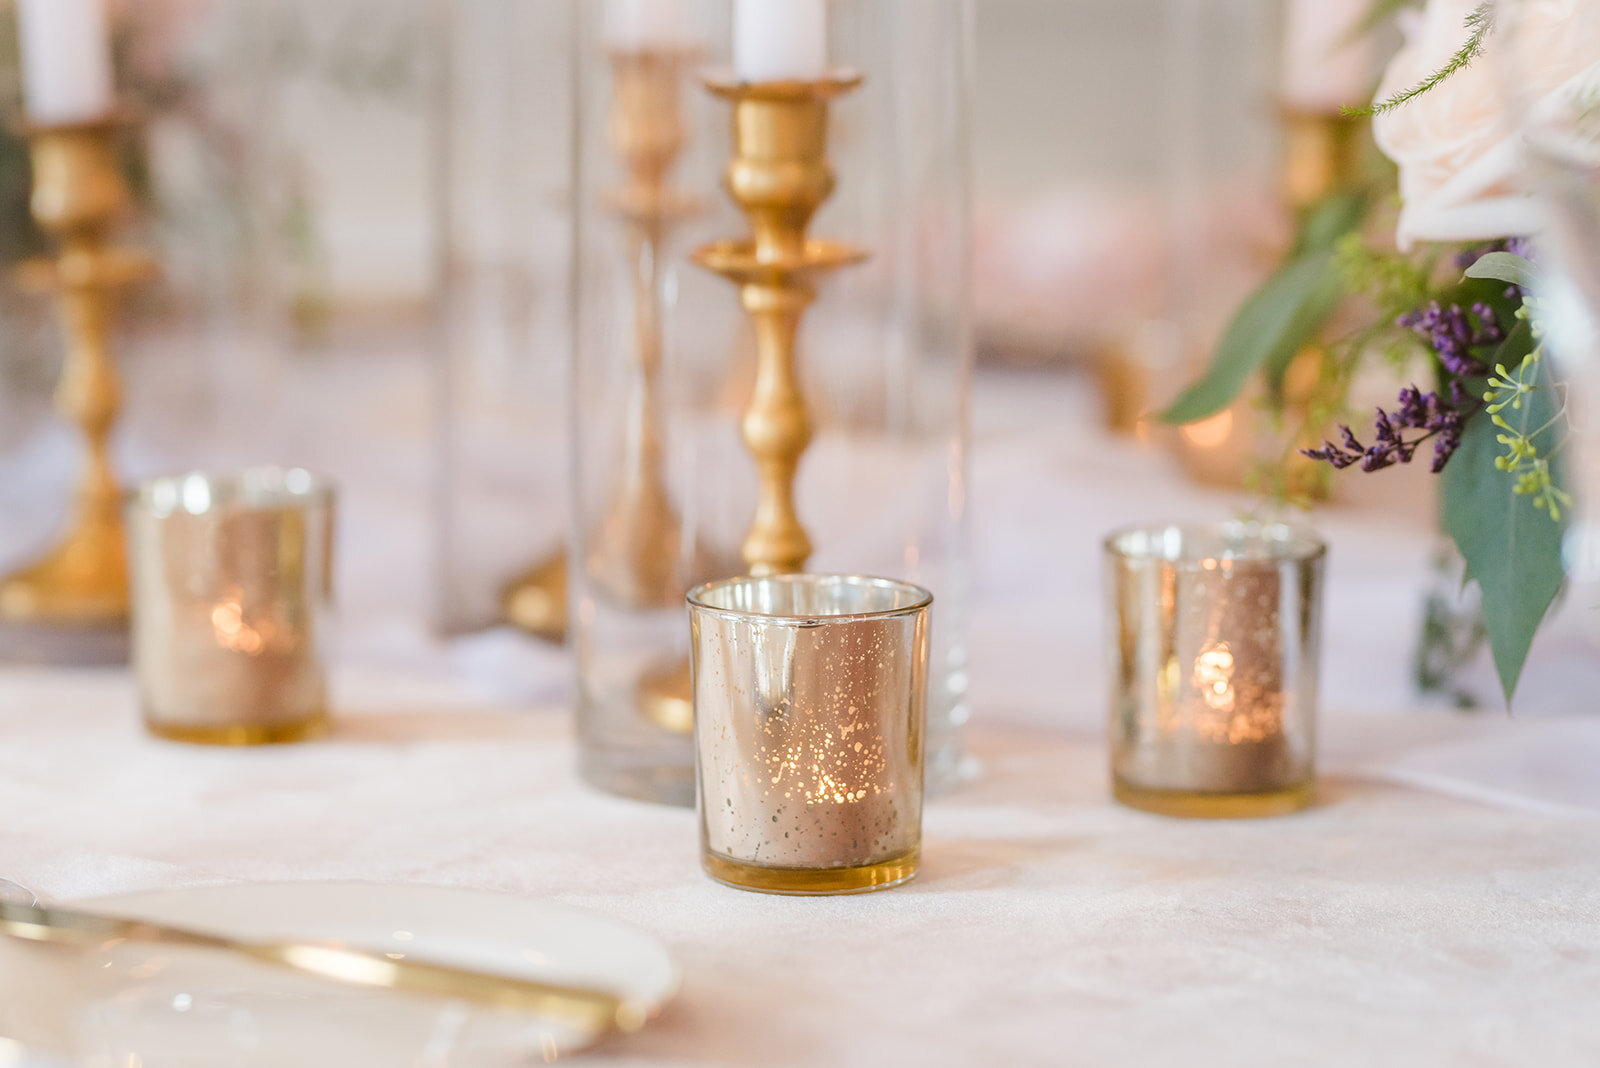 Wedding reception decor of gold candles and blush napkins for the tablescape wedding at the Don Cesar.jpg